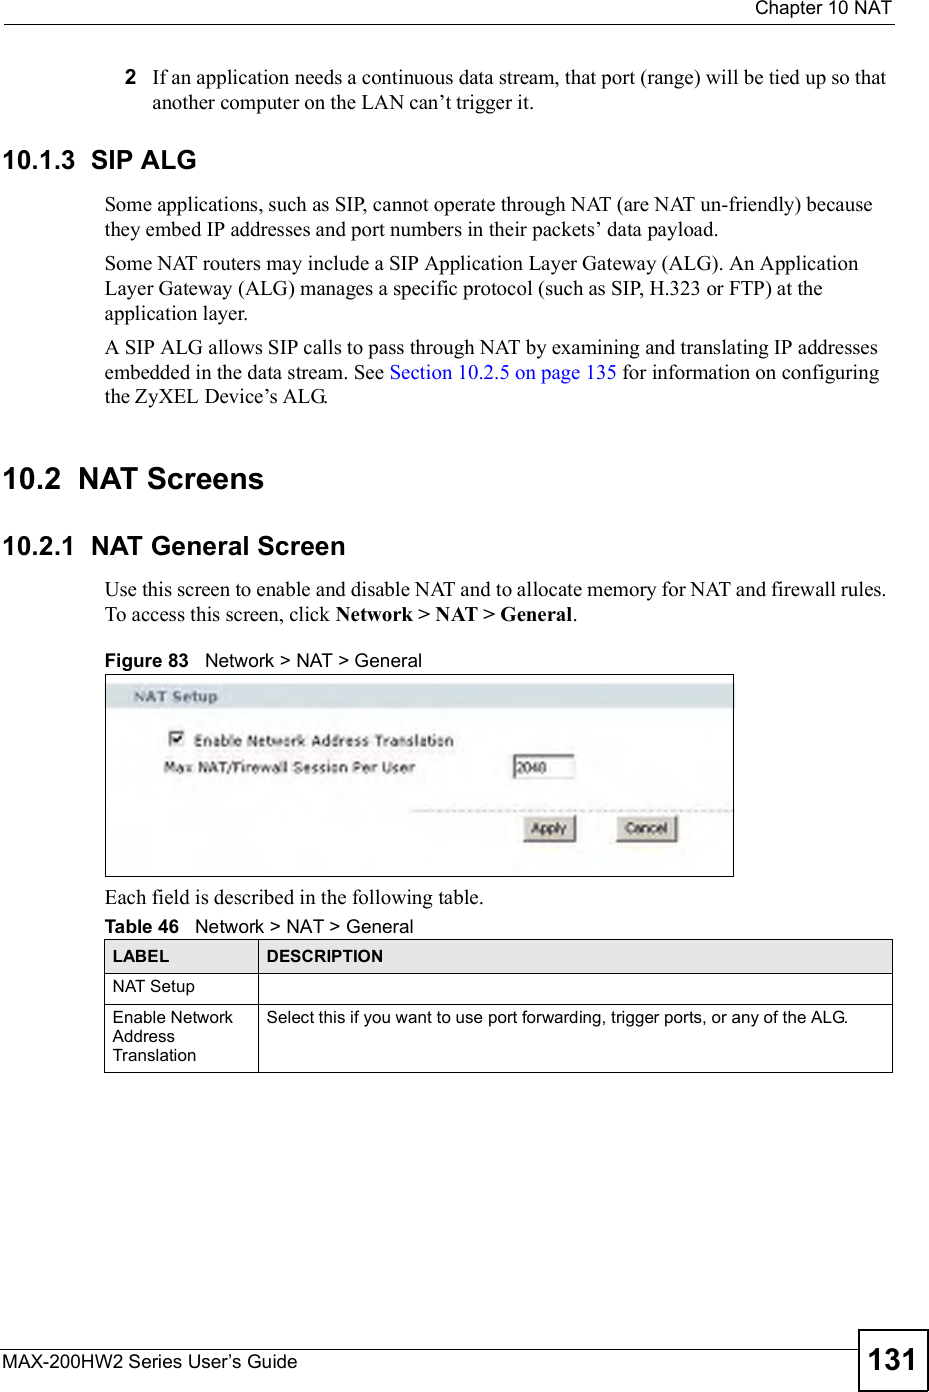  Chapter 10NATMAX-200HW2 Series User s Guide 1312If an application needs a continuous data stream, that port (range) will be tied up so that another computer on the LAN can!t trigger it. 10.1.3  SIP ALGSome applications, such as SIP, cannot operate through NAT (are NAT un-friendly) because they embed IP addresses and port numbers in their packets! data payload. Some NAT routers may include a SIP Application Layer Gateway (ALG). An Application Layer Gateway (ALG) manages a specific protocol (such as SIP, H.323 or FTP) at the application layer. A SIP ALG allows SIP calls to pass through NAT by examining and translating IP addresses embedded in the data stream. See Section 10.2.5 on page 135 for information on configuring the ZyXEL Device!s ALG.10.2  NAT Screens10.2.1  NAT General ScreenUse this screen to enable and disable NAT and to allocate memory for NAT and firewall rules. To access this screen, click Network &gt; NAT &gt; General.Figure 83   Network &gt; NAT &gt; GeneralEach field is described in the following table.Table 46   Network &gt; NAT &gt; GeneralLABEL DESCRIPTIONNAT SetupEnable Network Address TranslationSelect this if you want to use port forwarding, trigger ports, or any of the ALG.